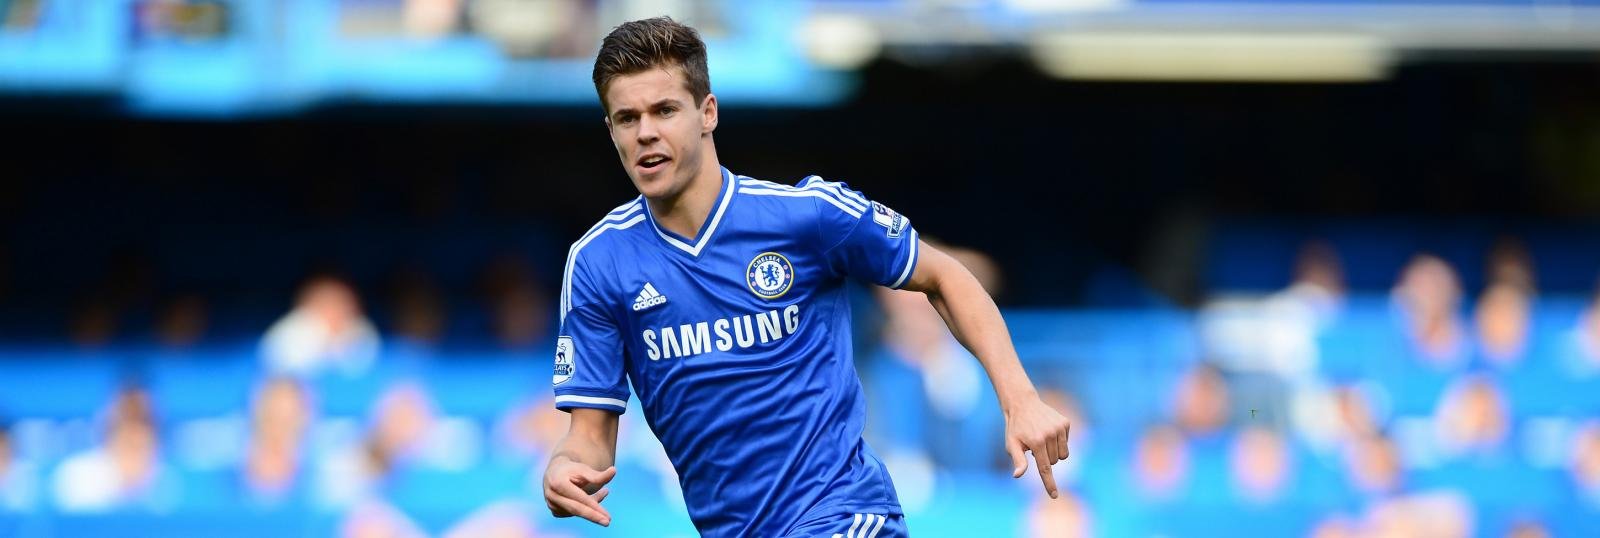 Chelsea agree loan move for 23-year-old midfielder